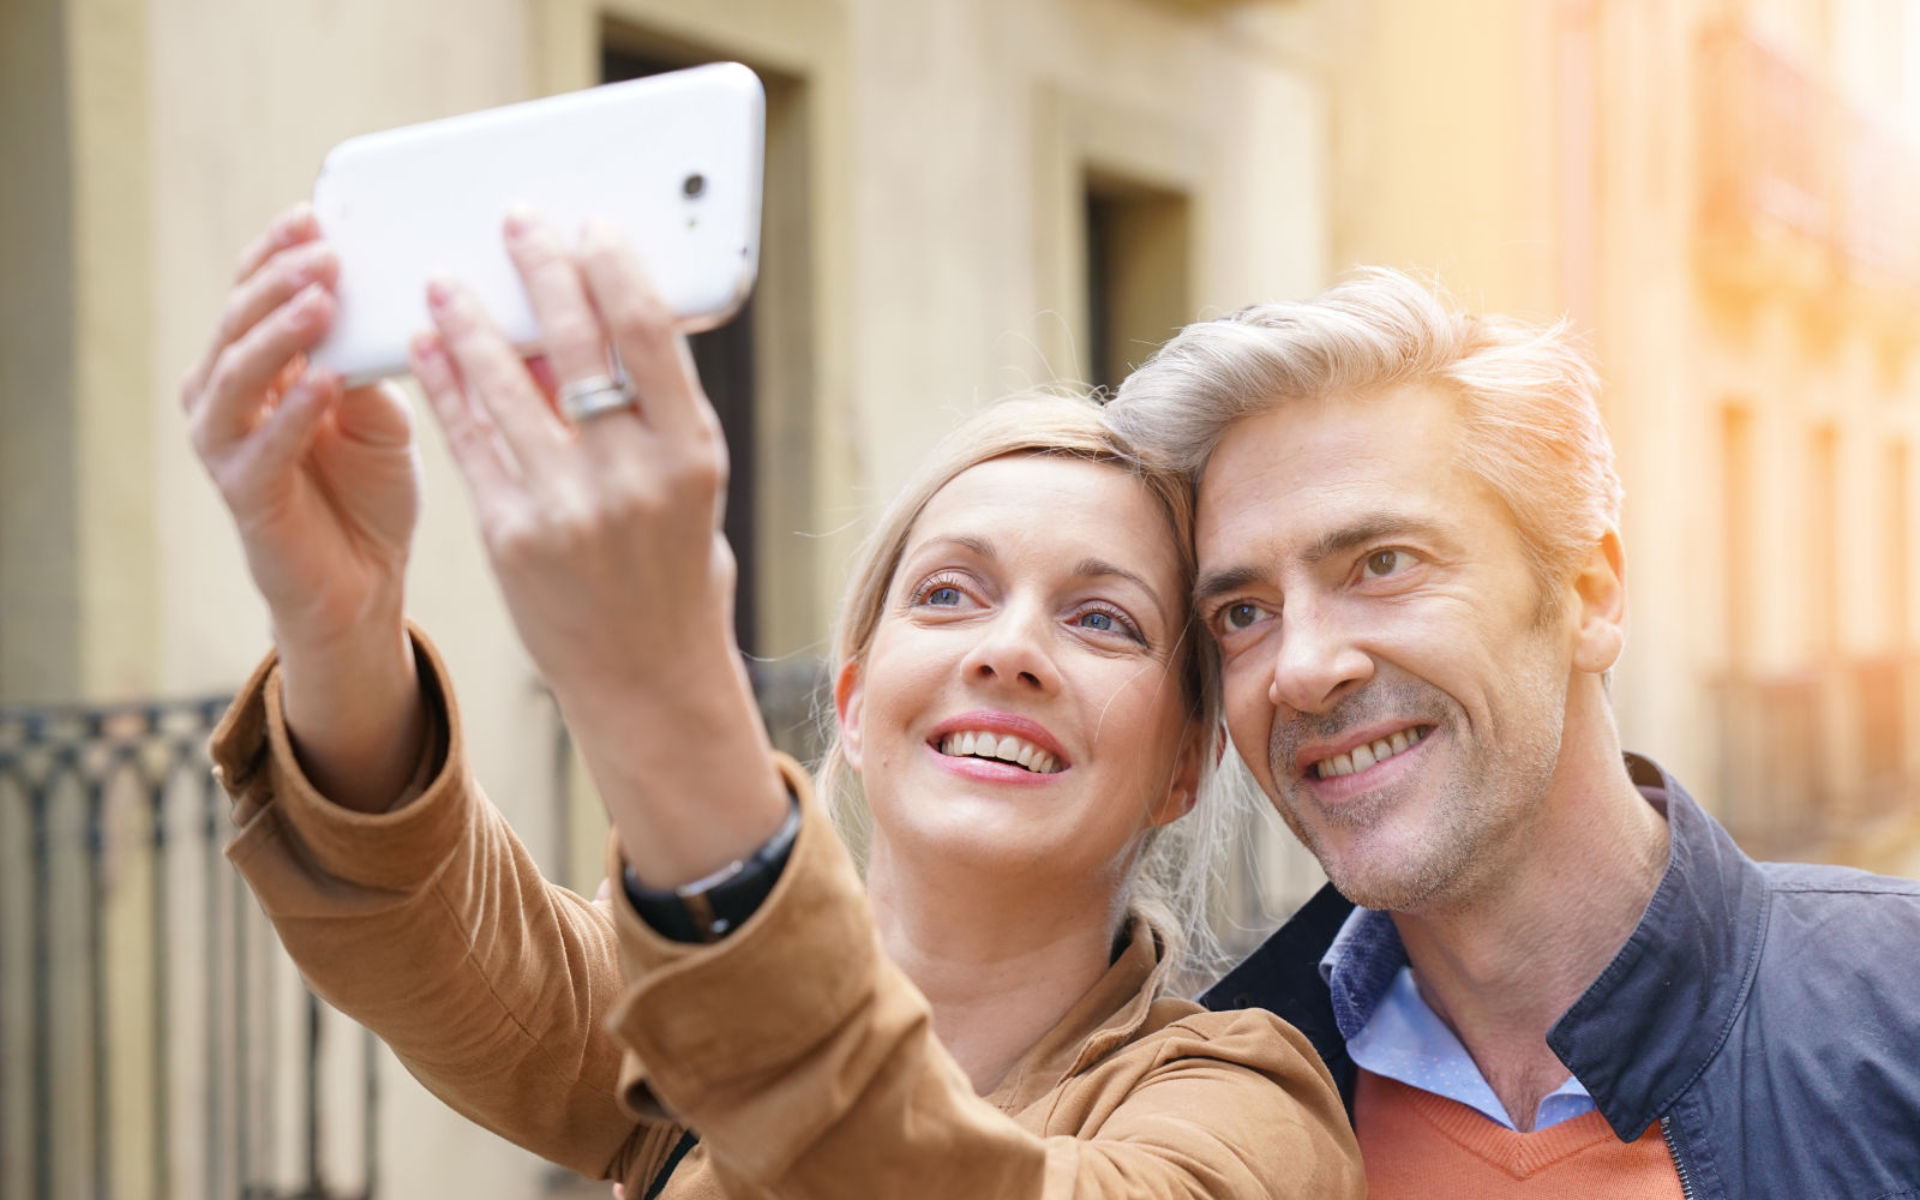 Smiling mature couple taking a selfie on a street.